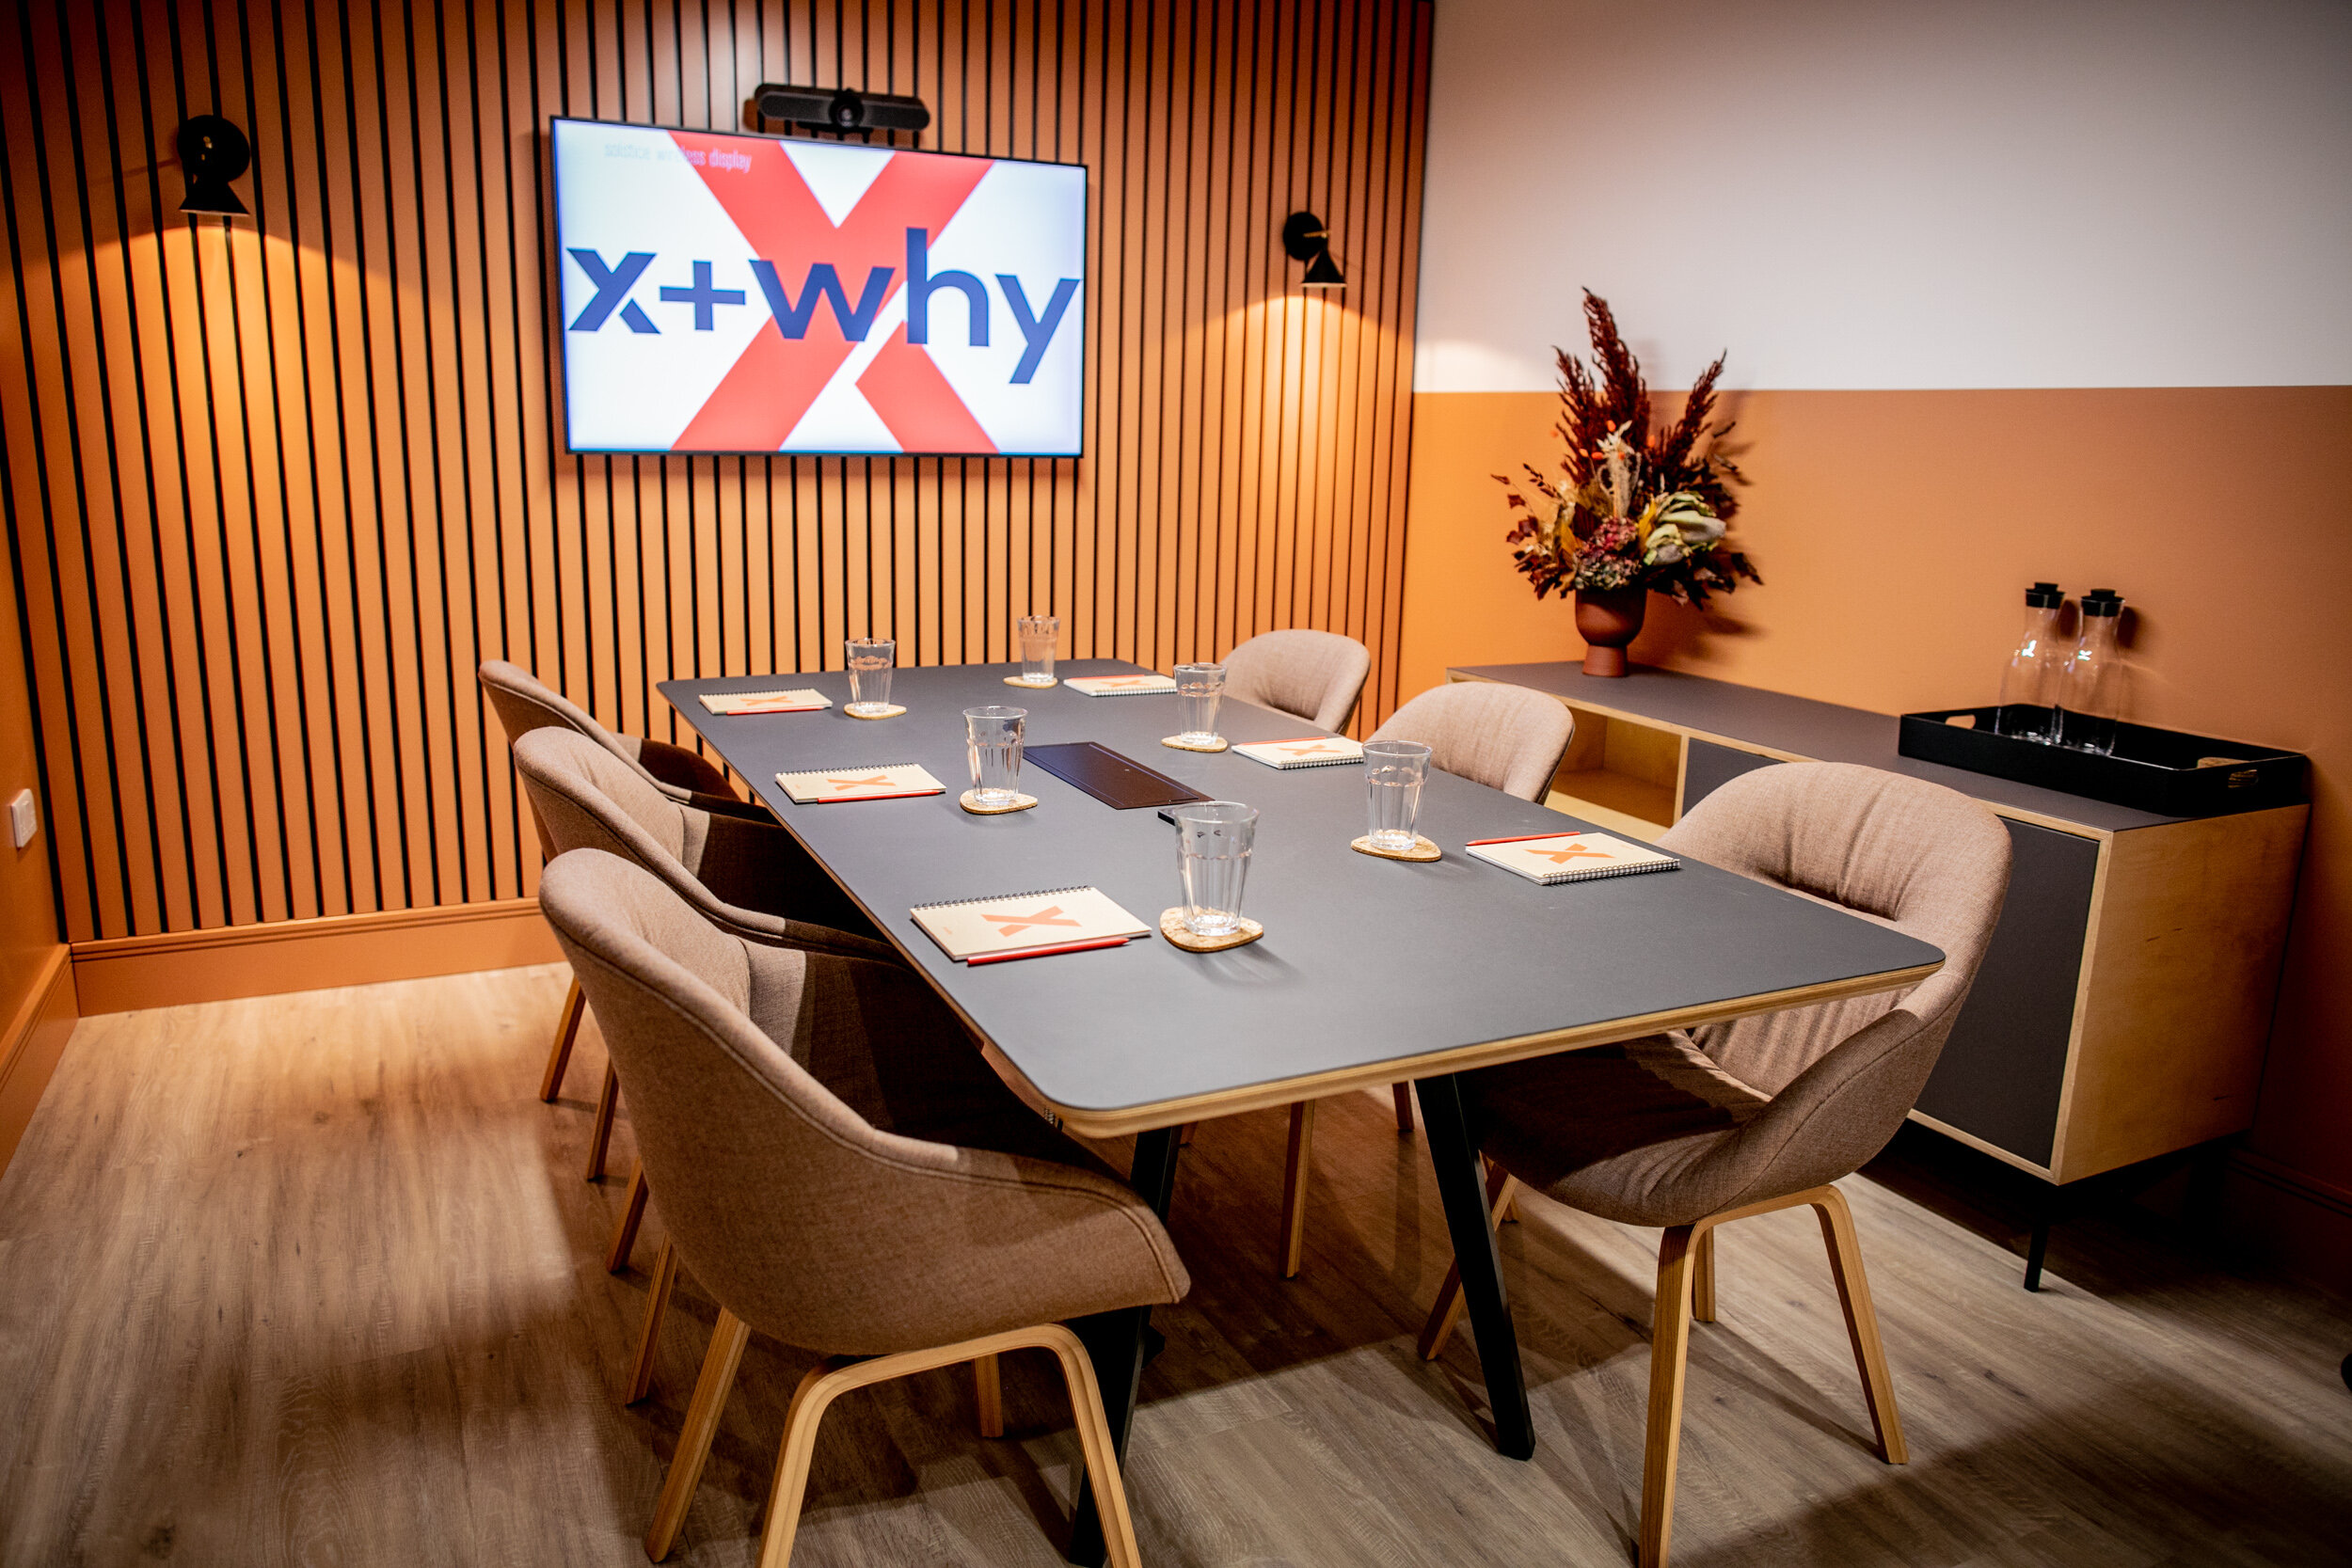 Meeting room at X+Why The Fulwood | Meeting rooms bookable by the day in Holborn via Tally Market